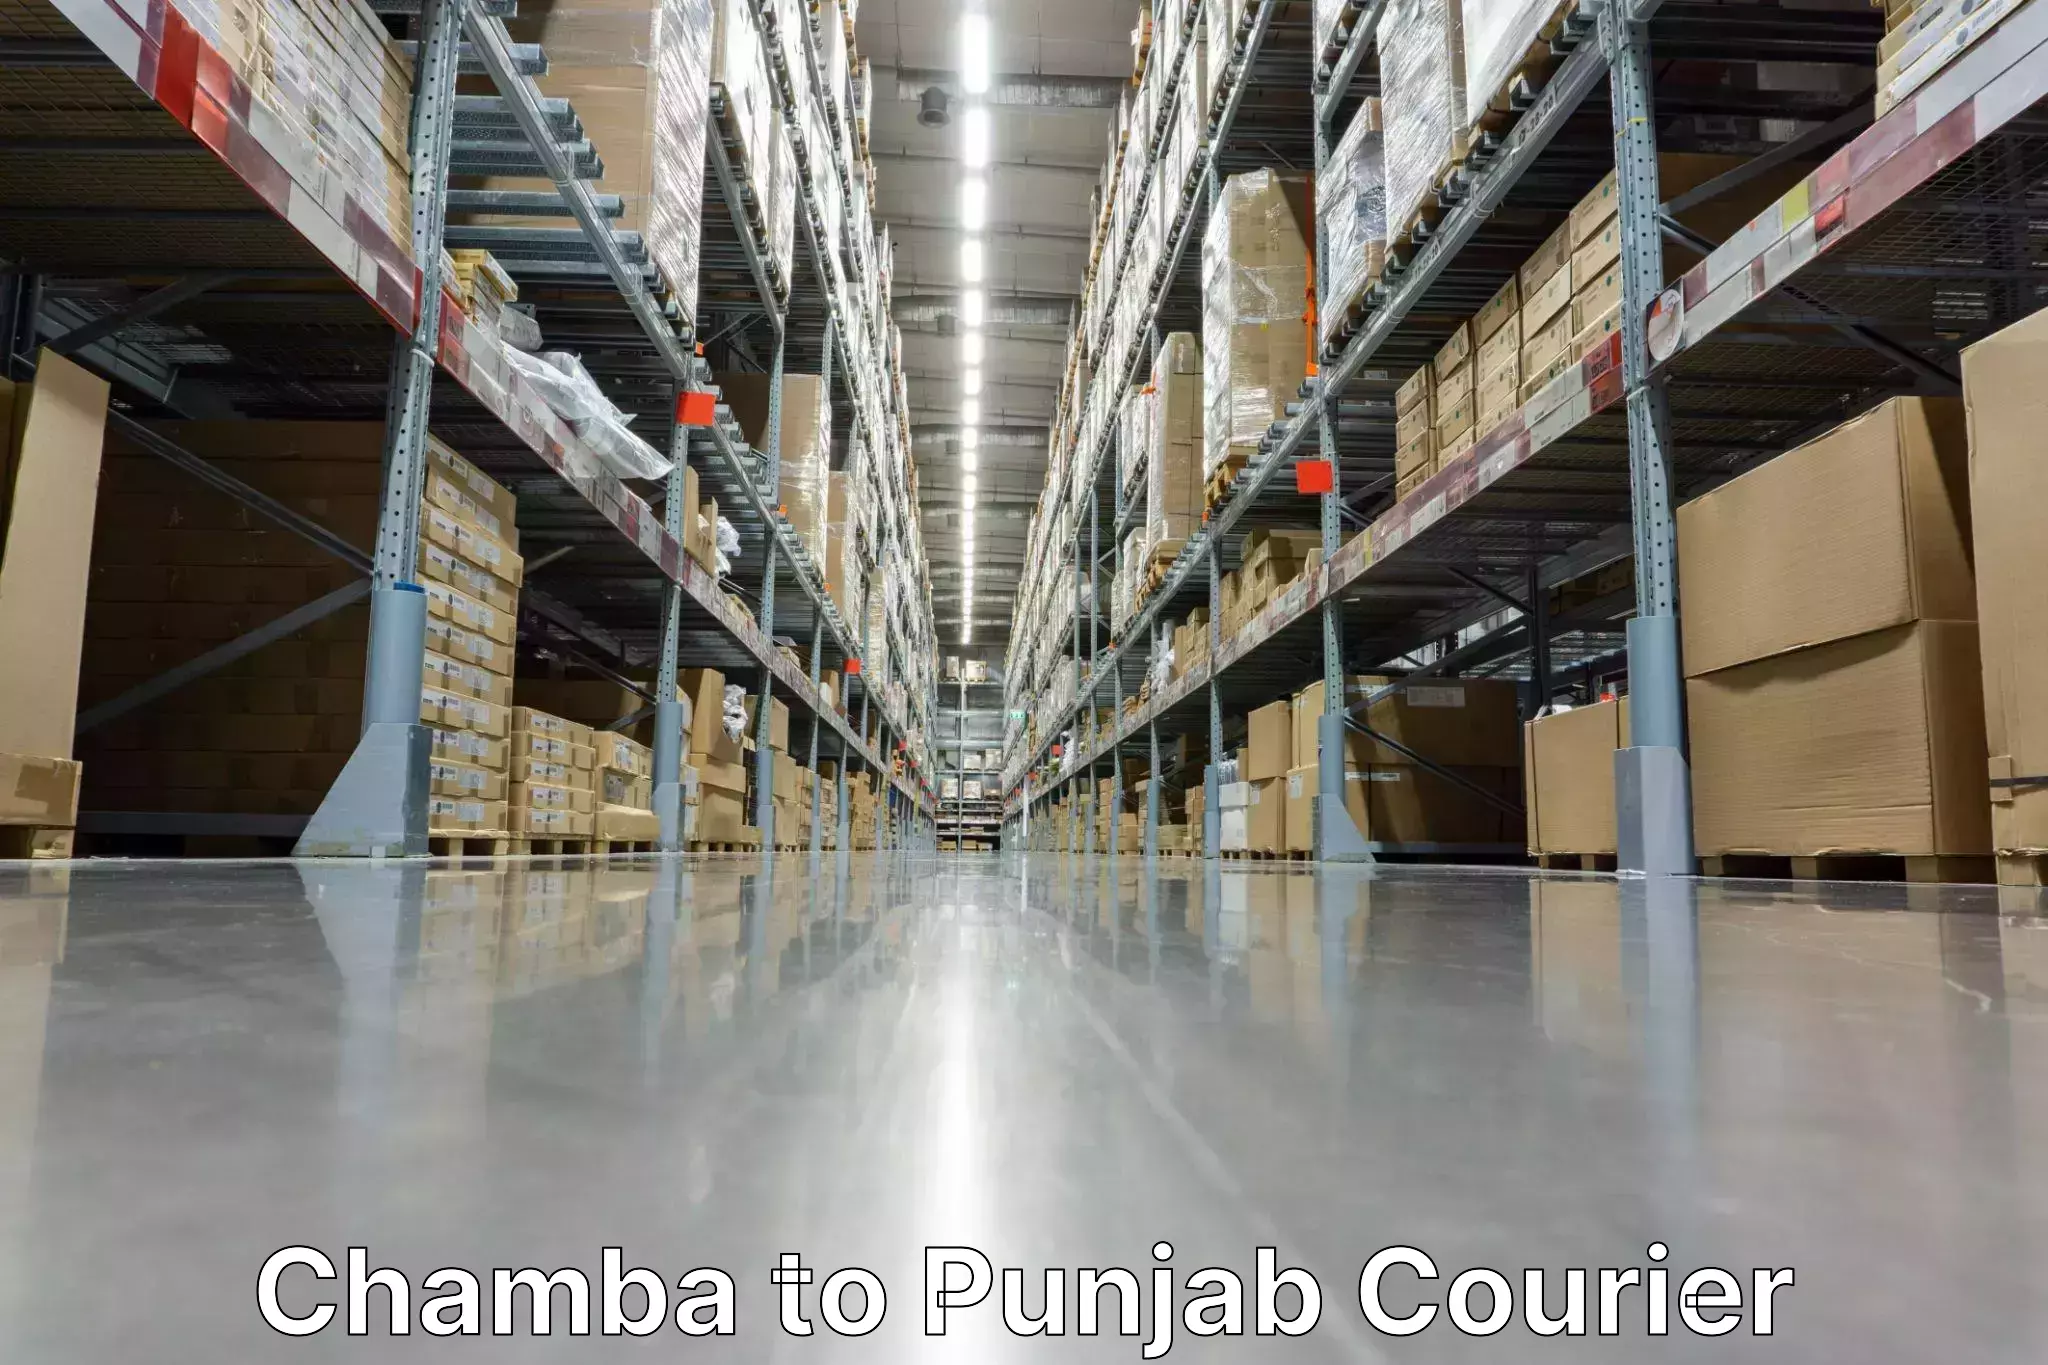 24-hour courier service in Chamba to Amritsar